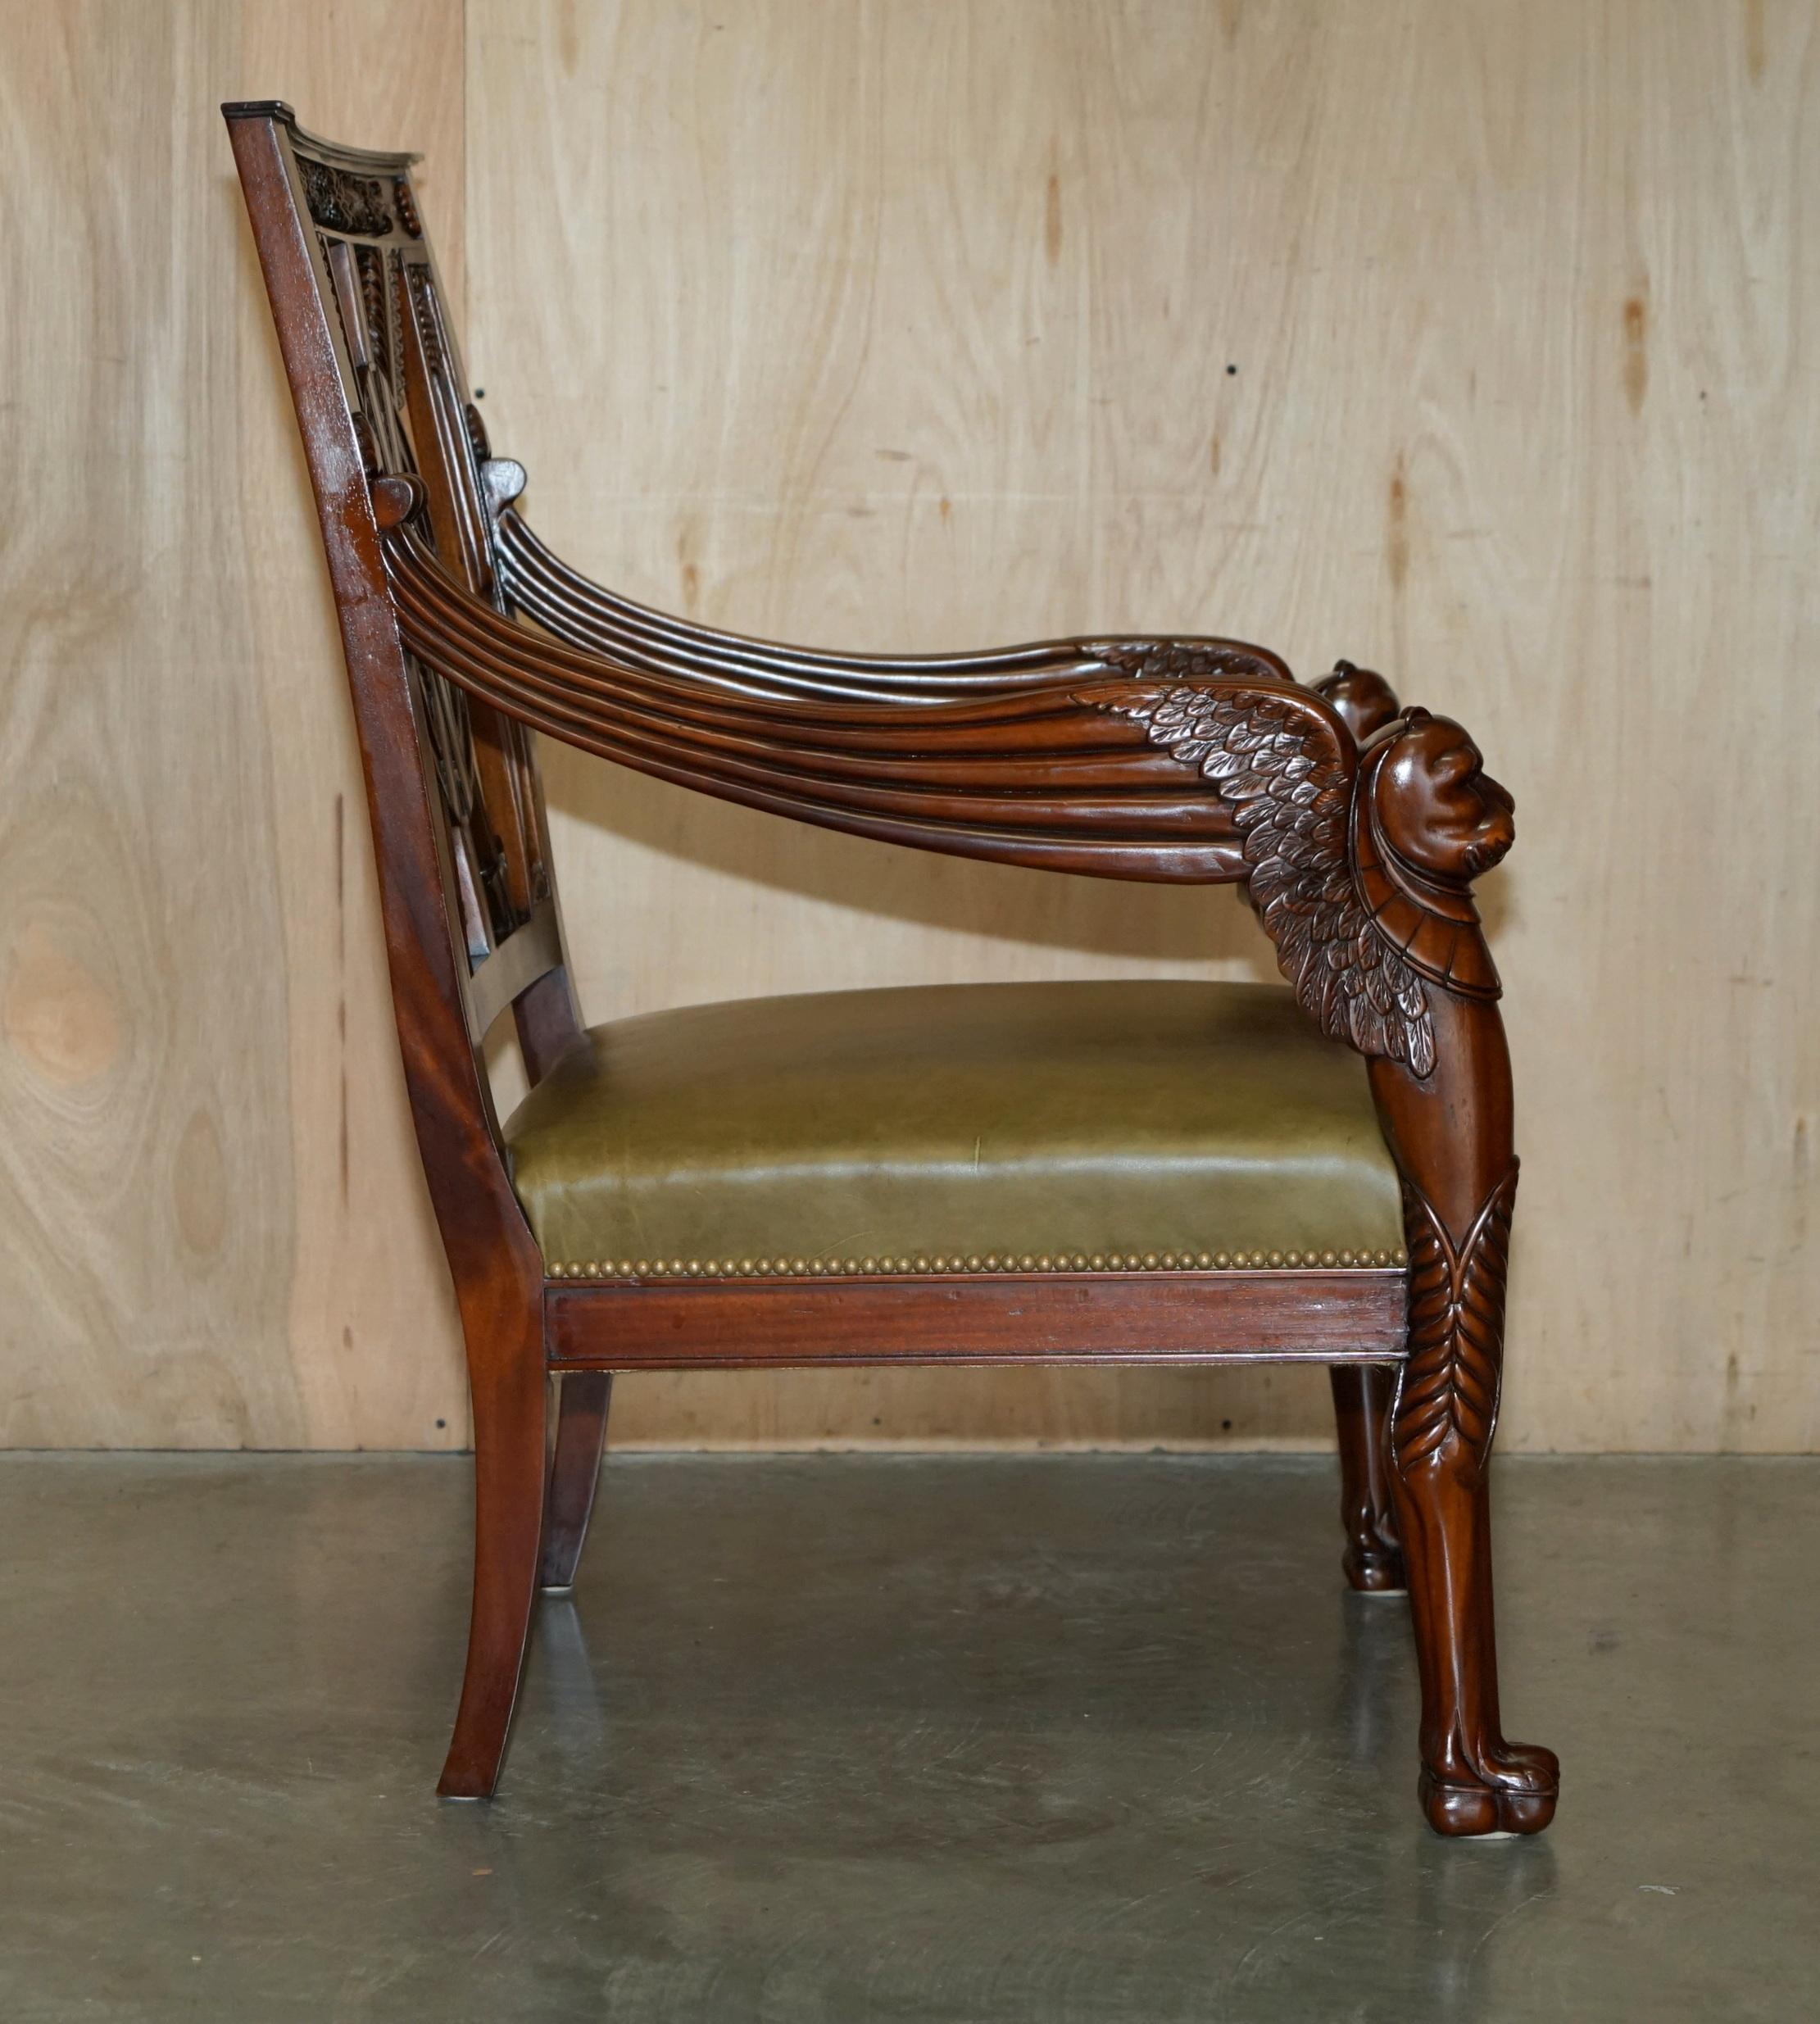 EXQUISITE PAIR OF HAND CARVED HARDWOOD LiBRARY ARMCHAIRS LION GRIFFON WING ARMS For Sale 8